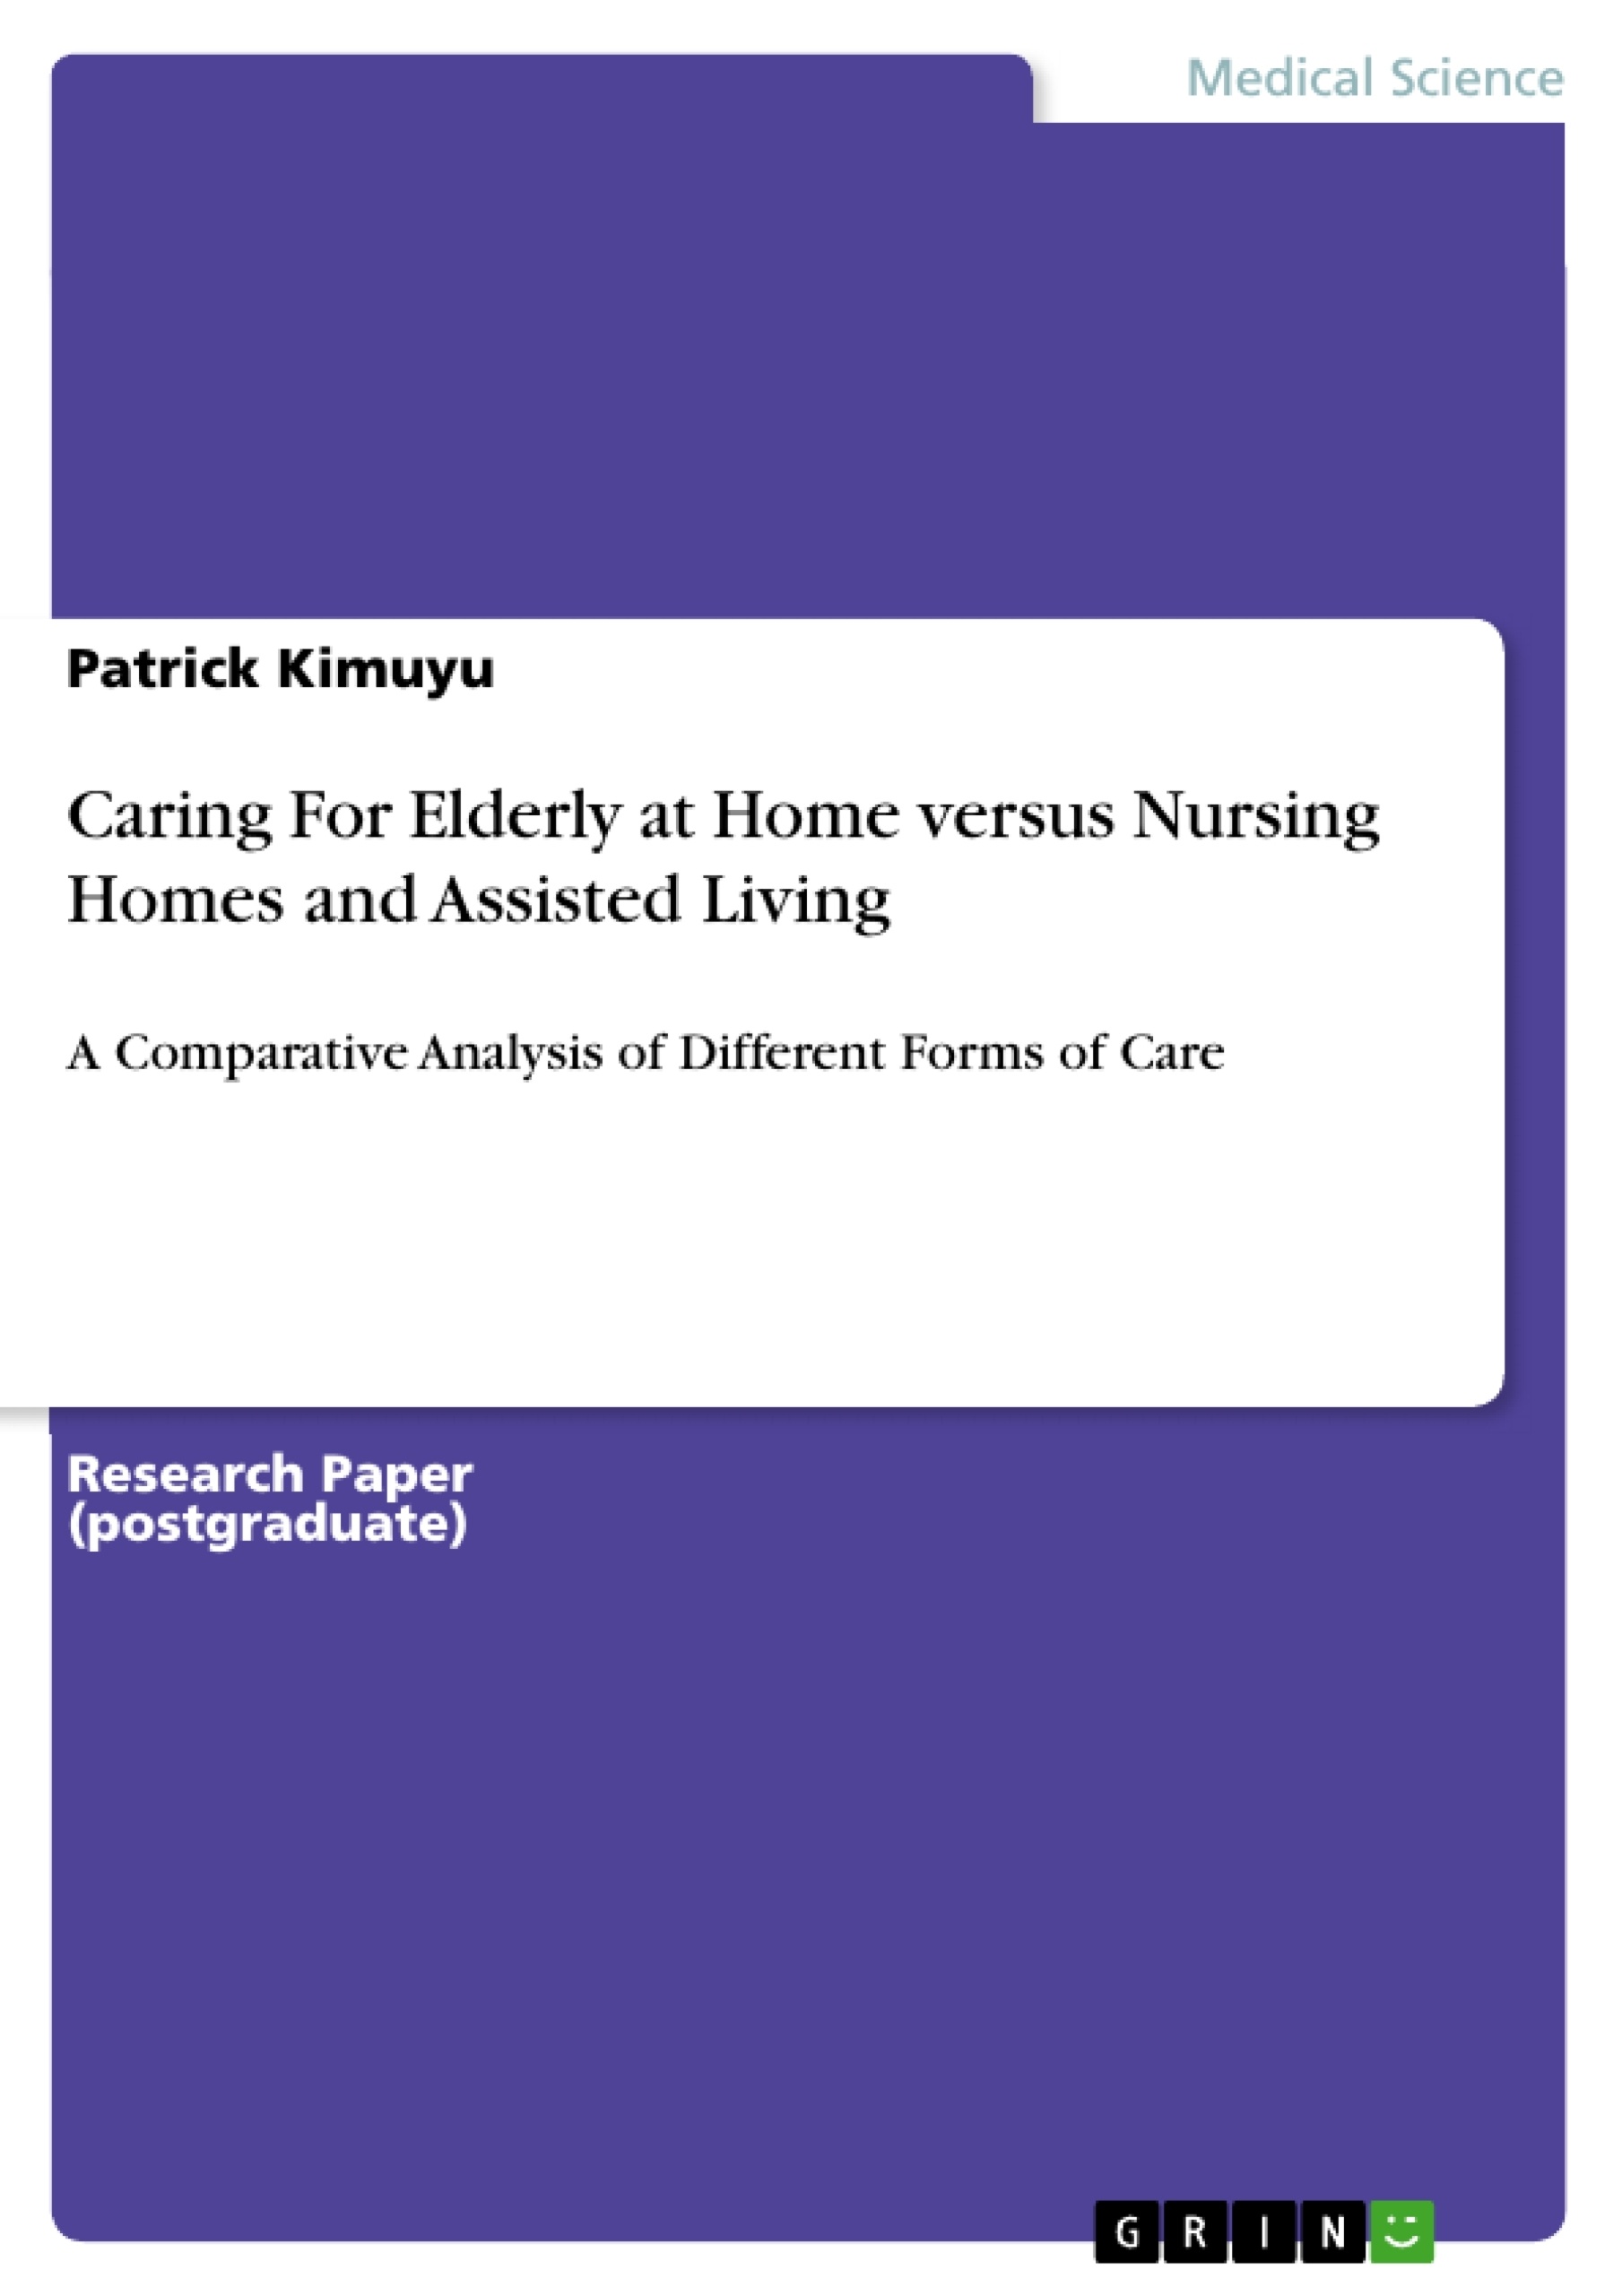 Titre: Caring For Elderly at Home versus Nursing Homes and Assisted Living